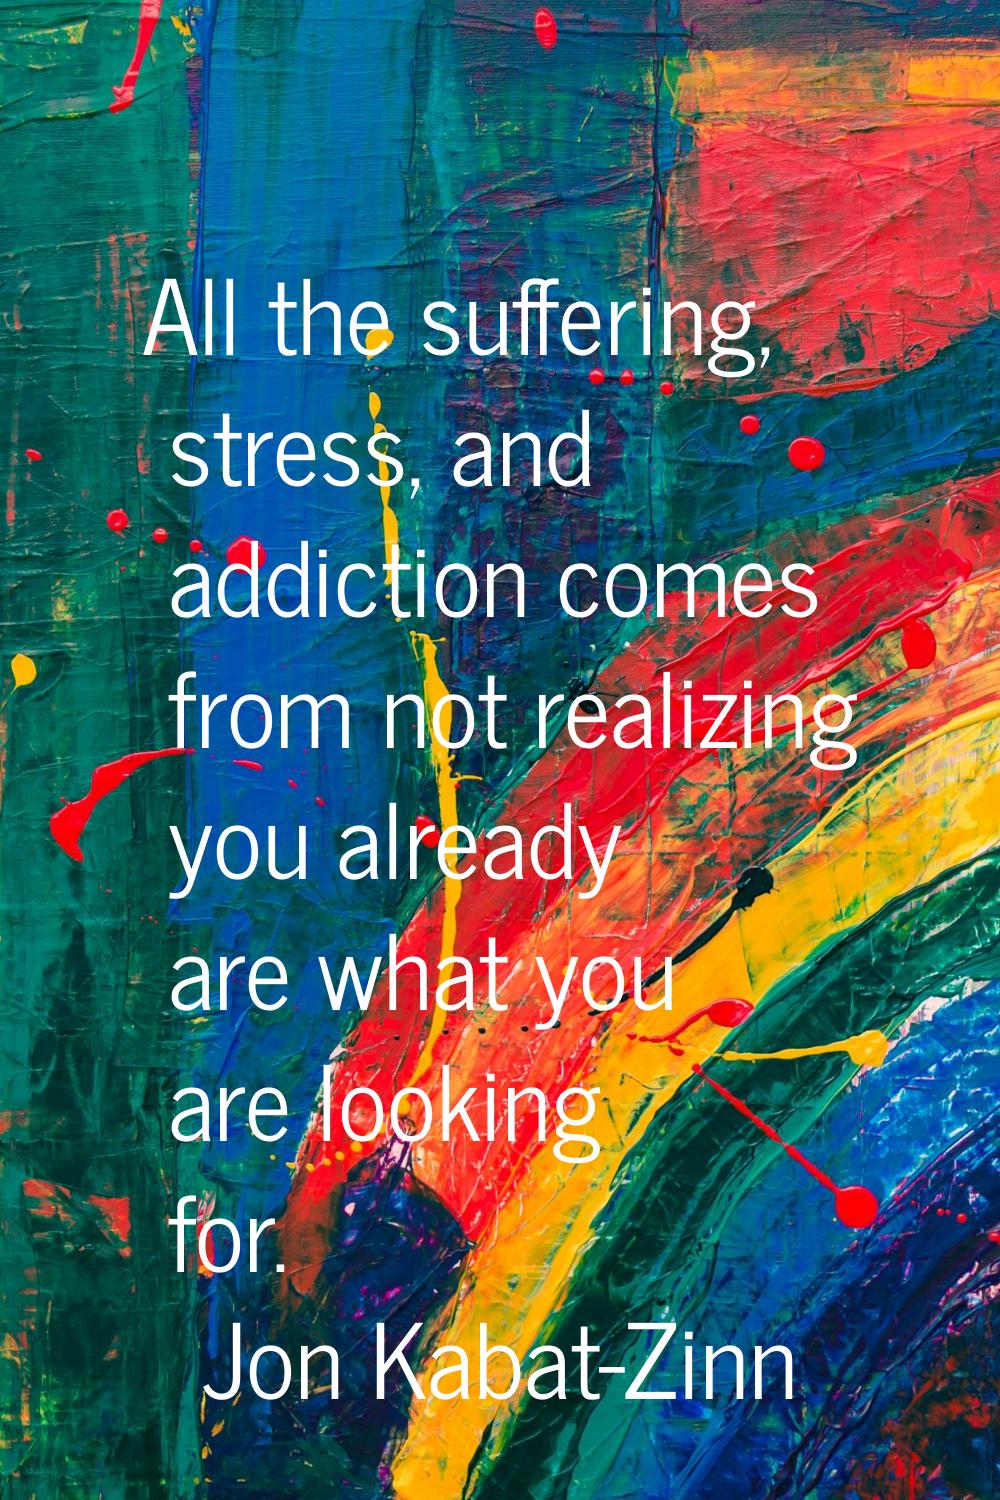 All the suffering, stress, and addiction comes from not realizing you already are what you are look